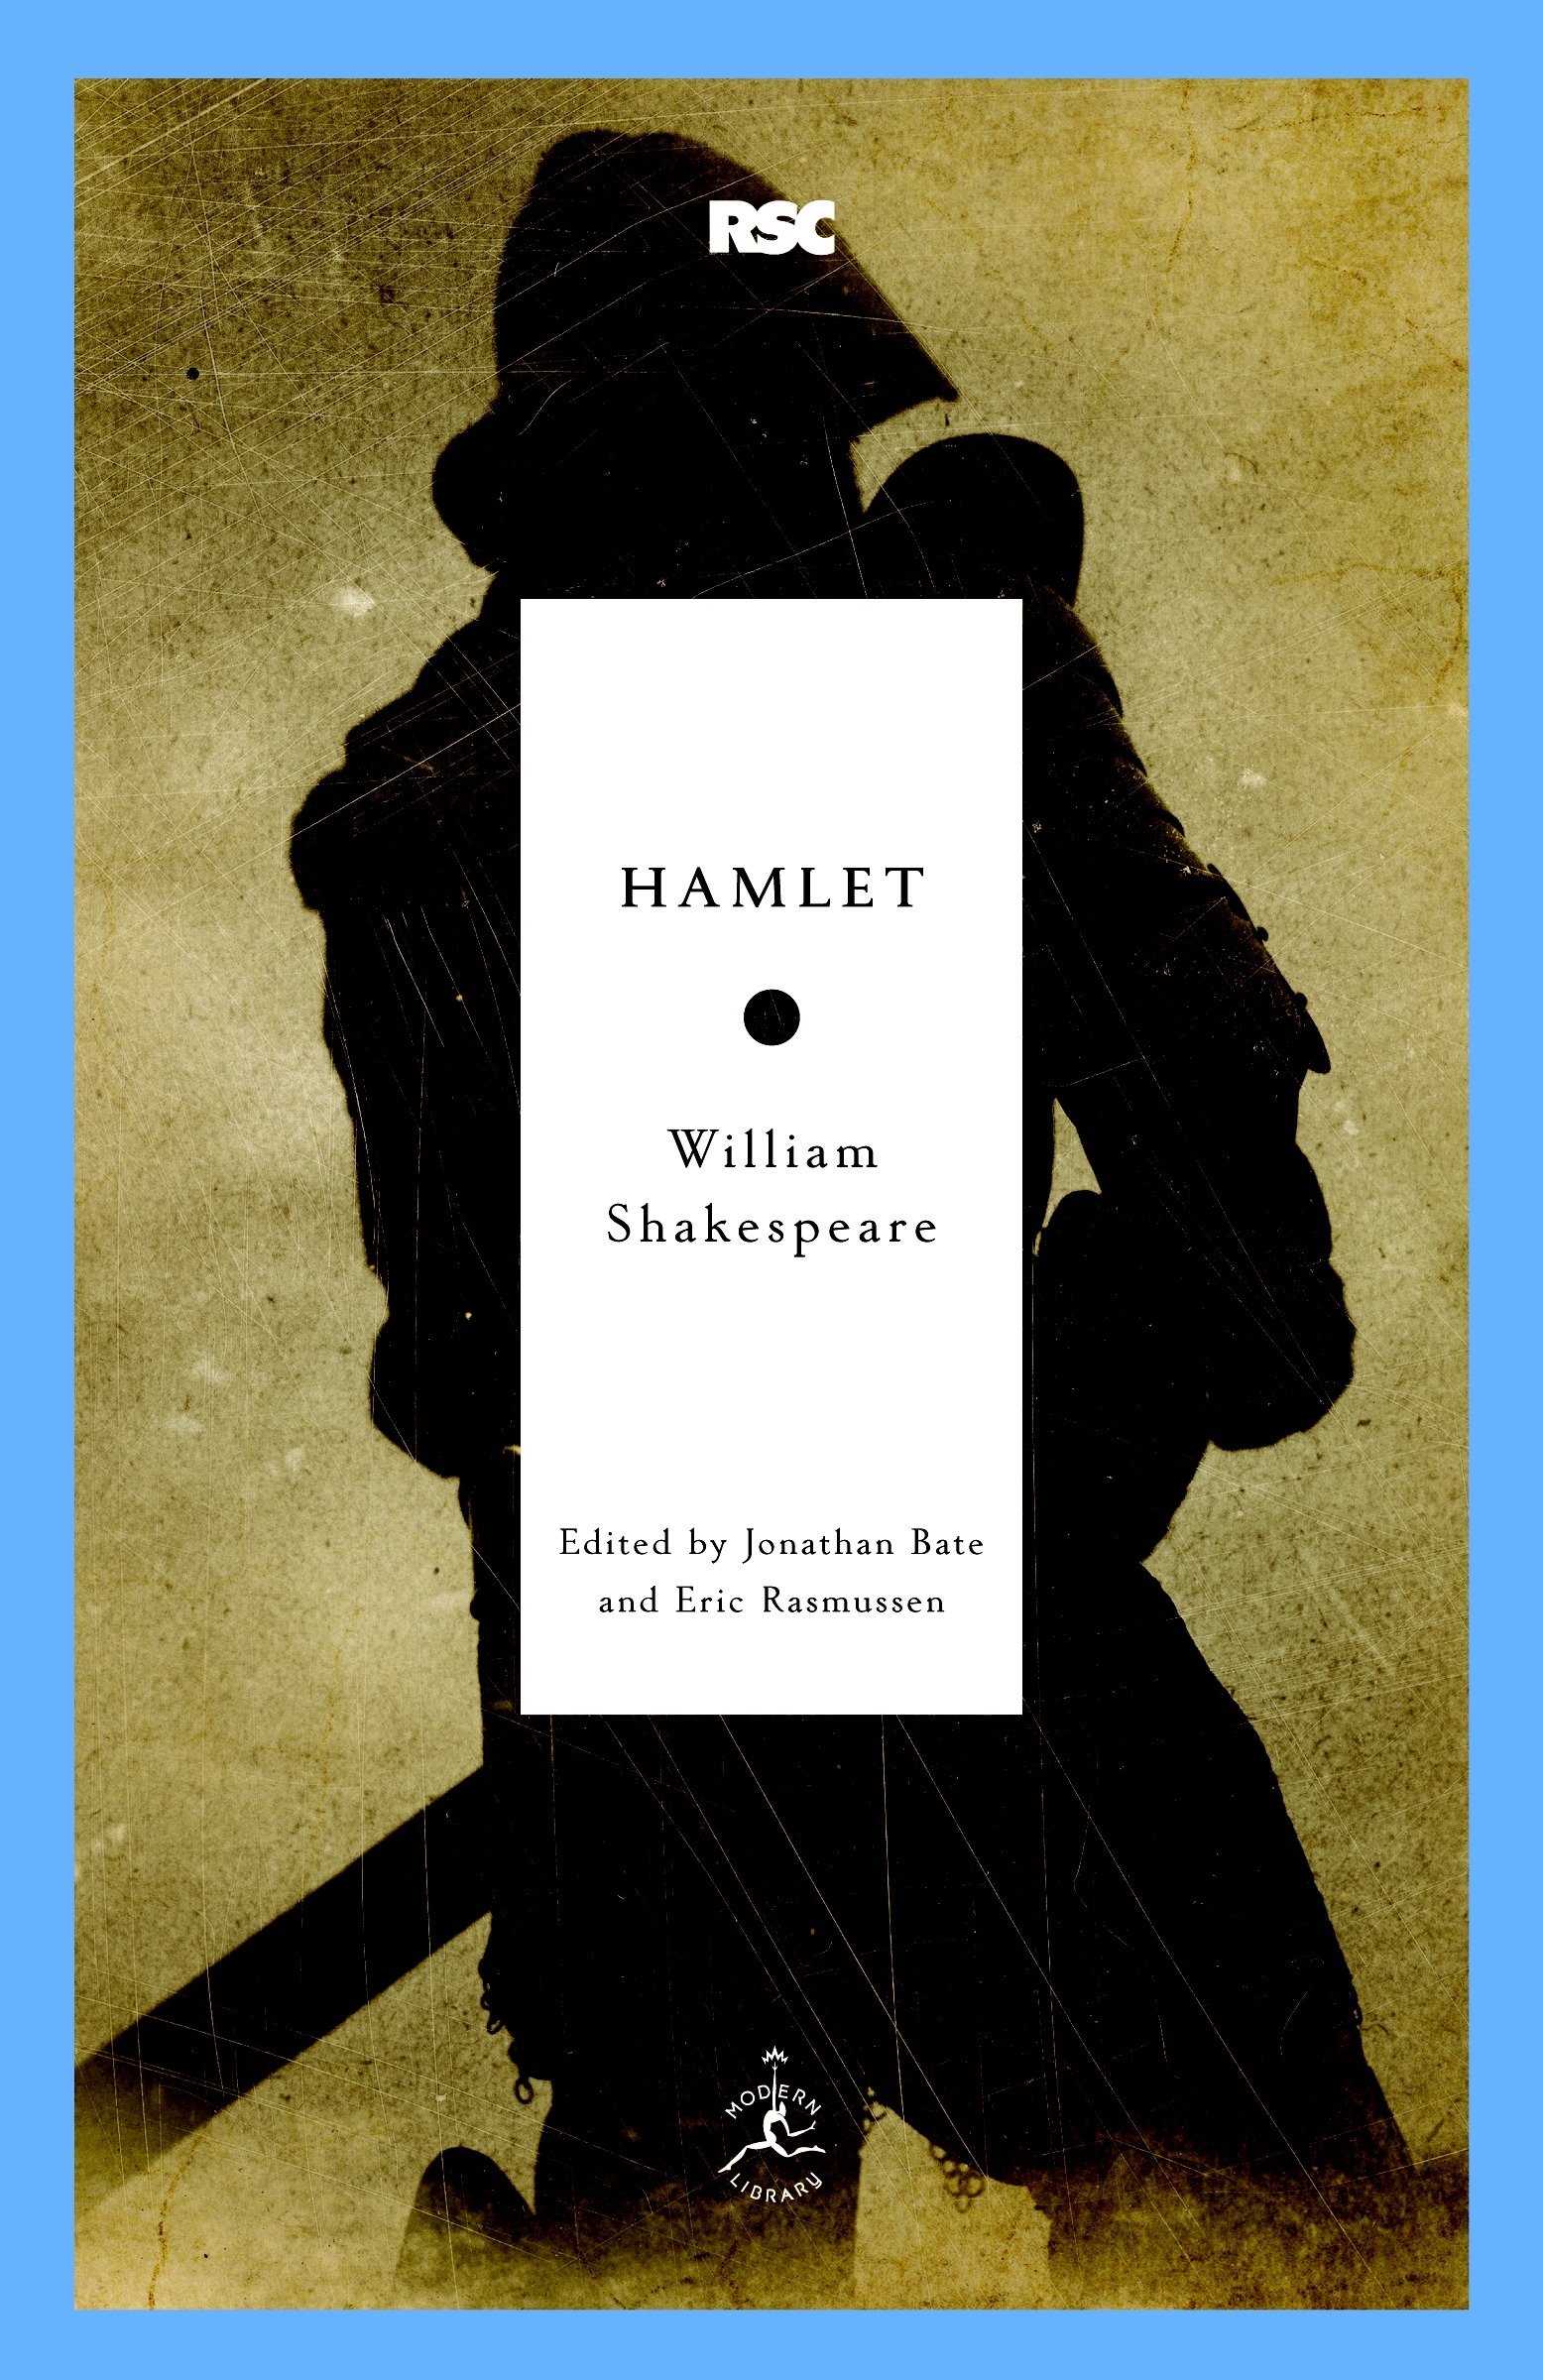 book review hamlet by william shakespeare